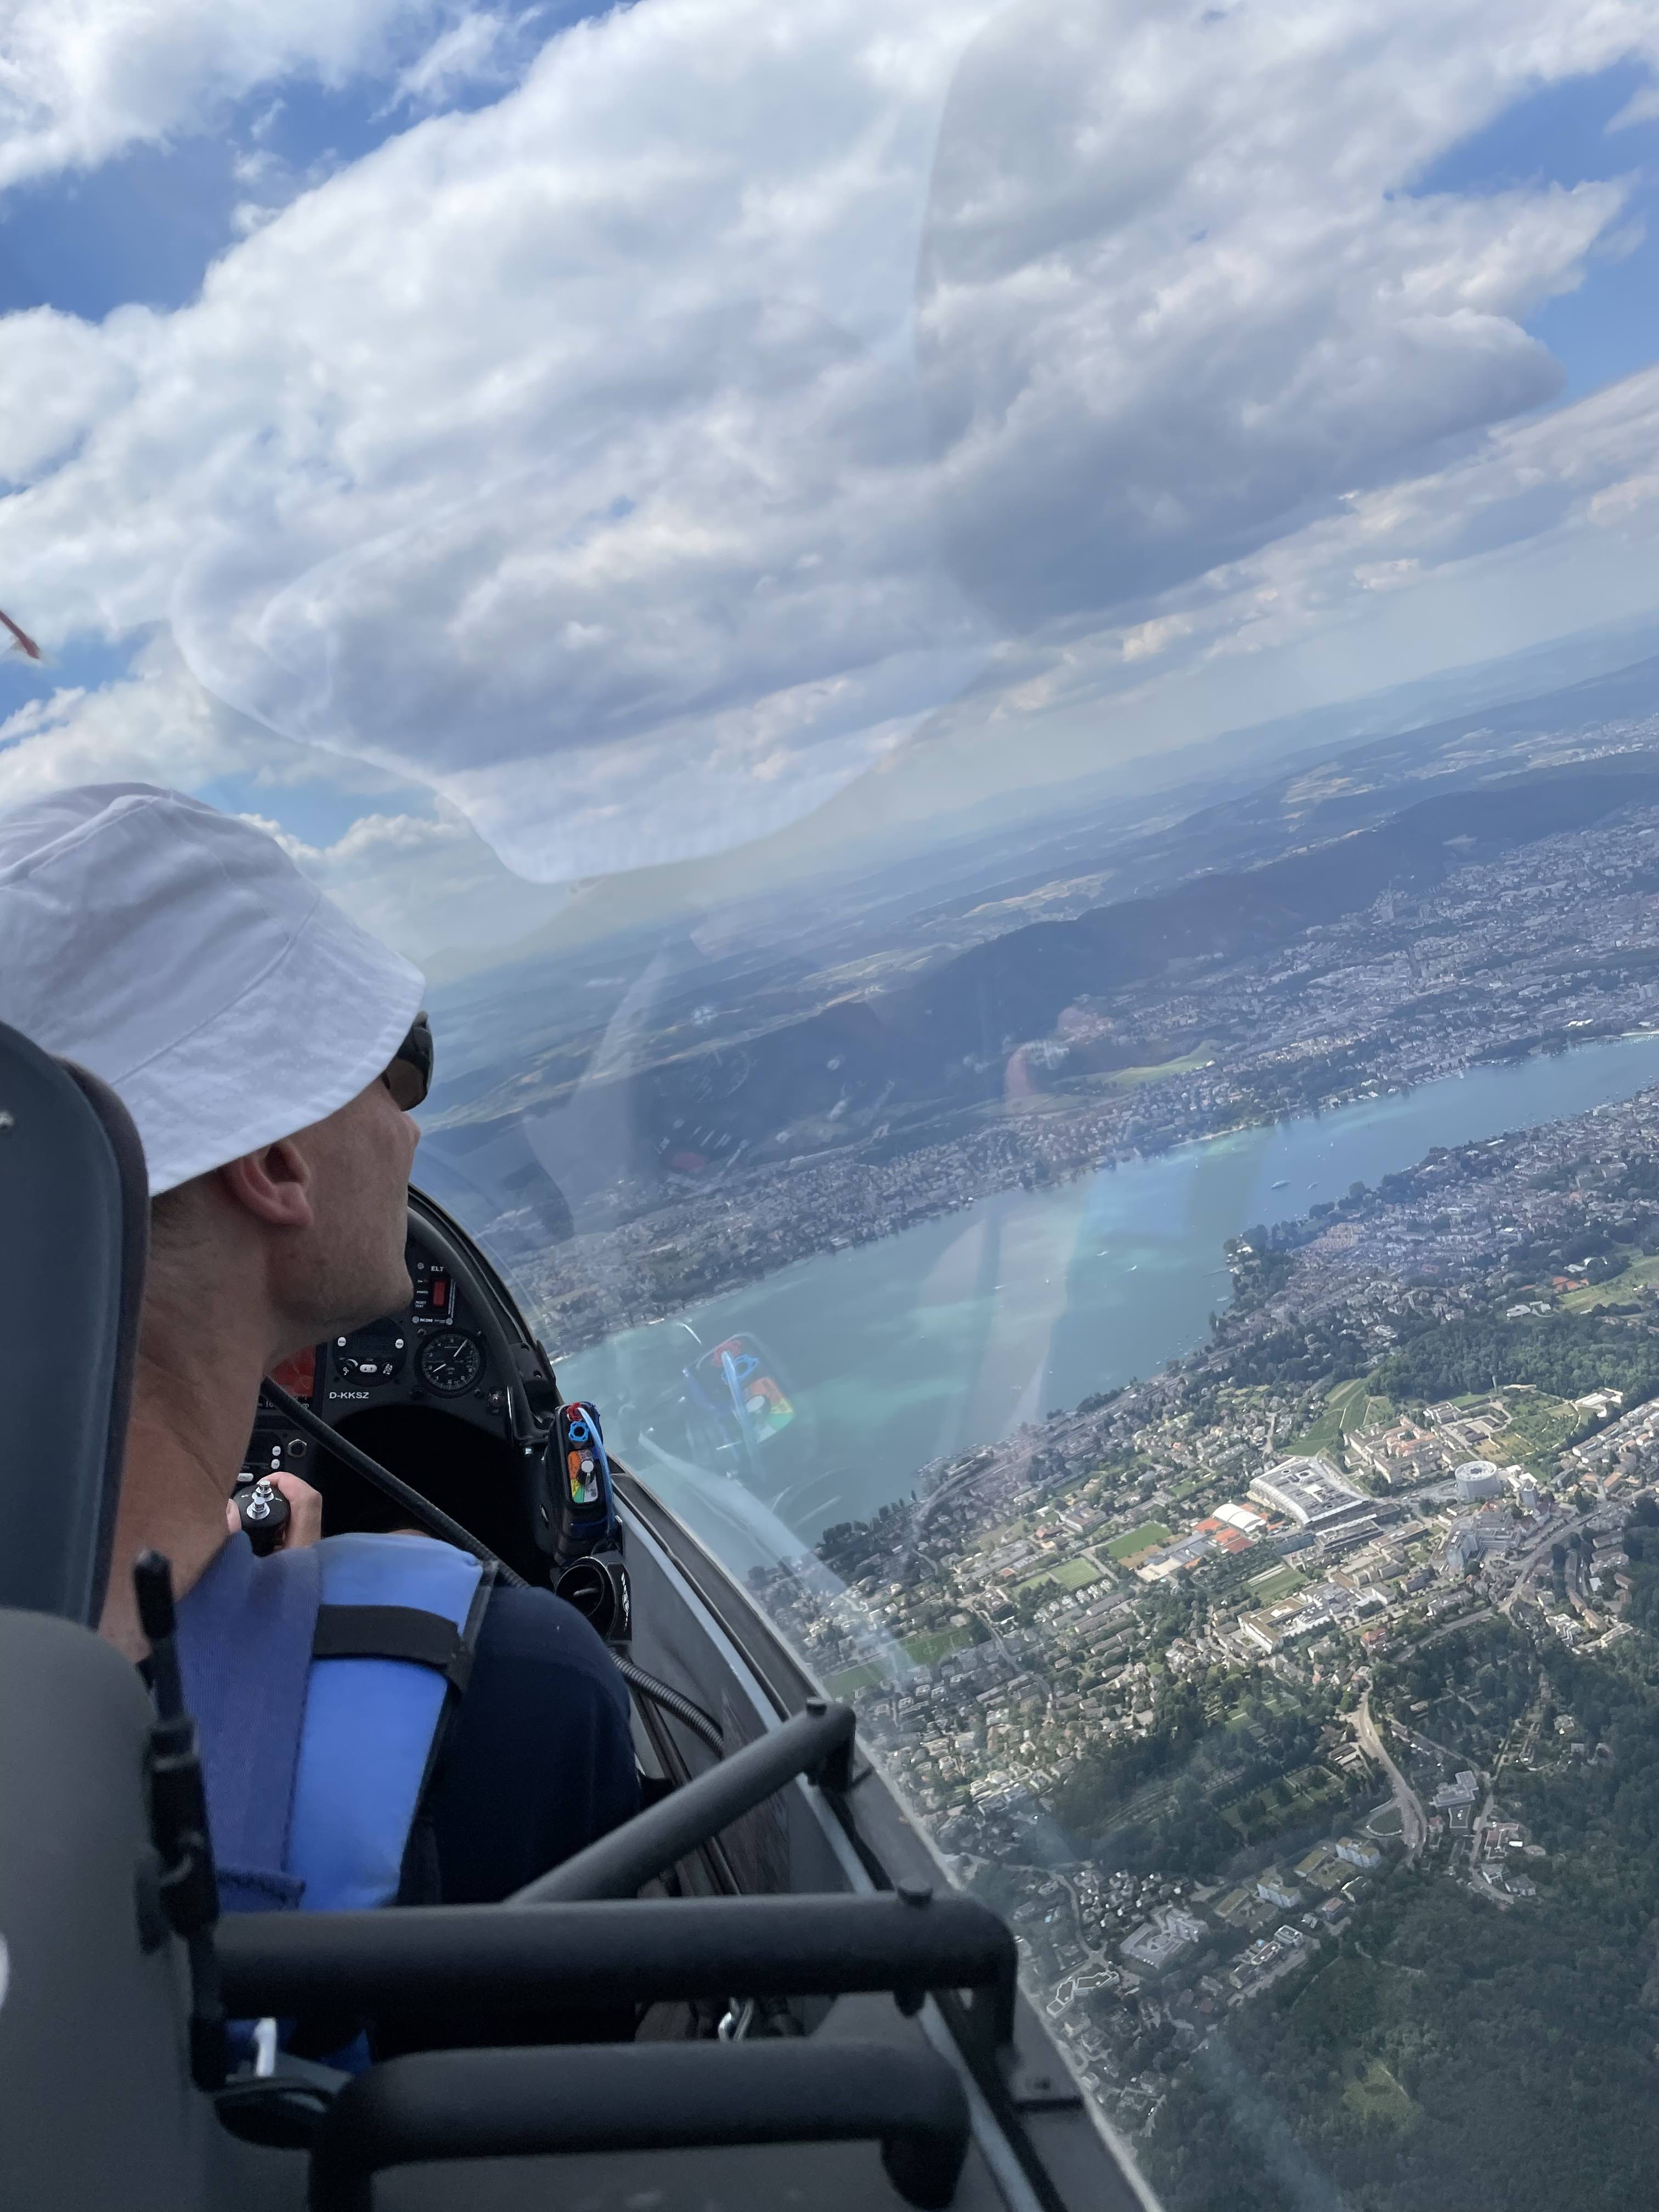 View of Zurich from the glider